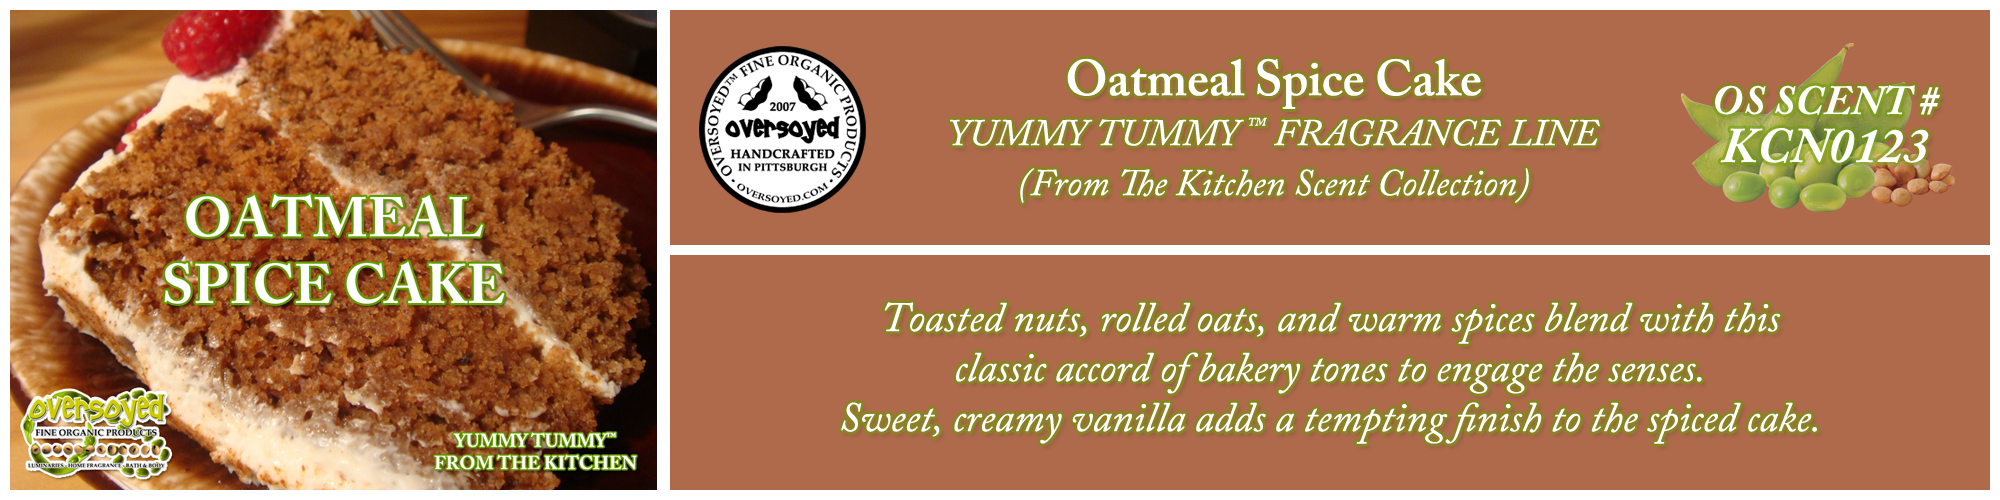 Oatmeal Spice Cake Handcrafted Products Collection